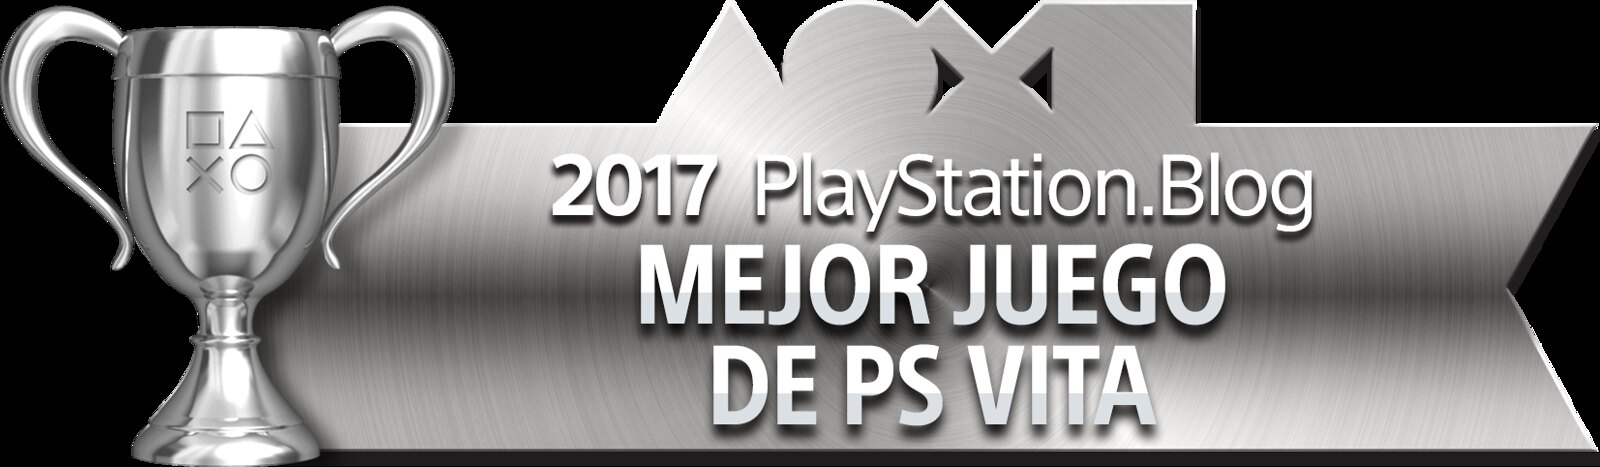 PlayStation Blog Game of the Year 2017 - Best PS Vita Game (Silver)